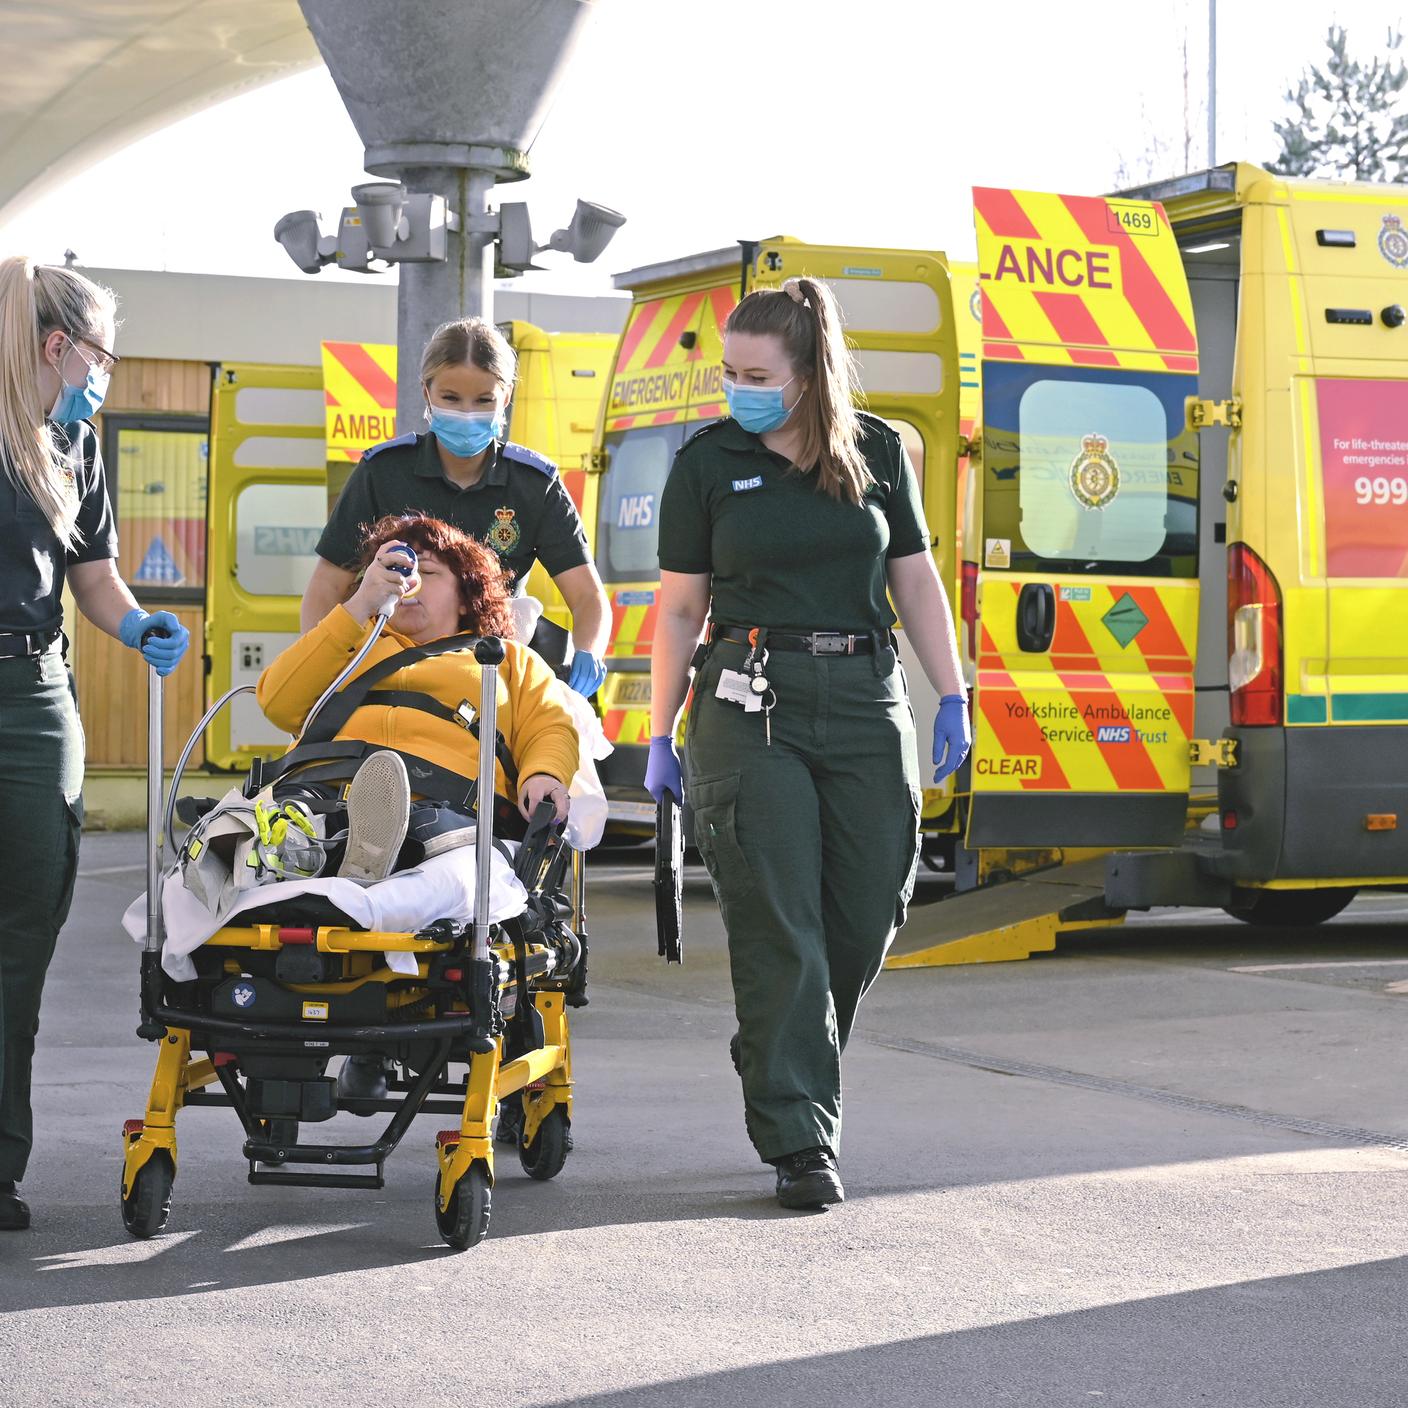 Paramedic women taking care of another woman in a wheelchair